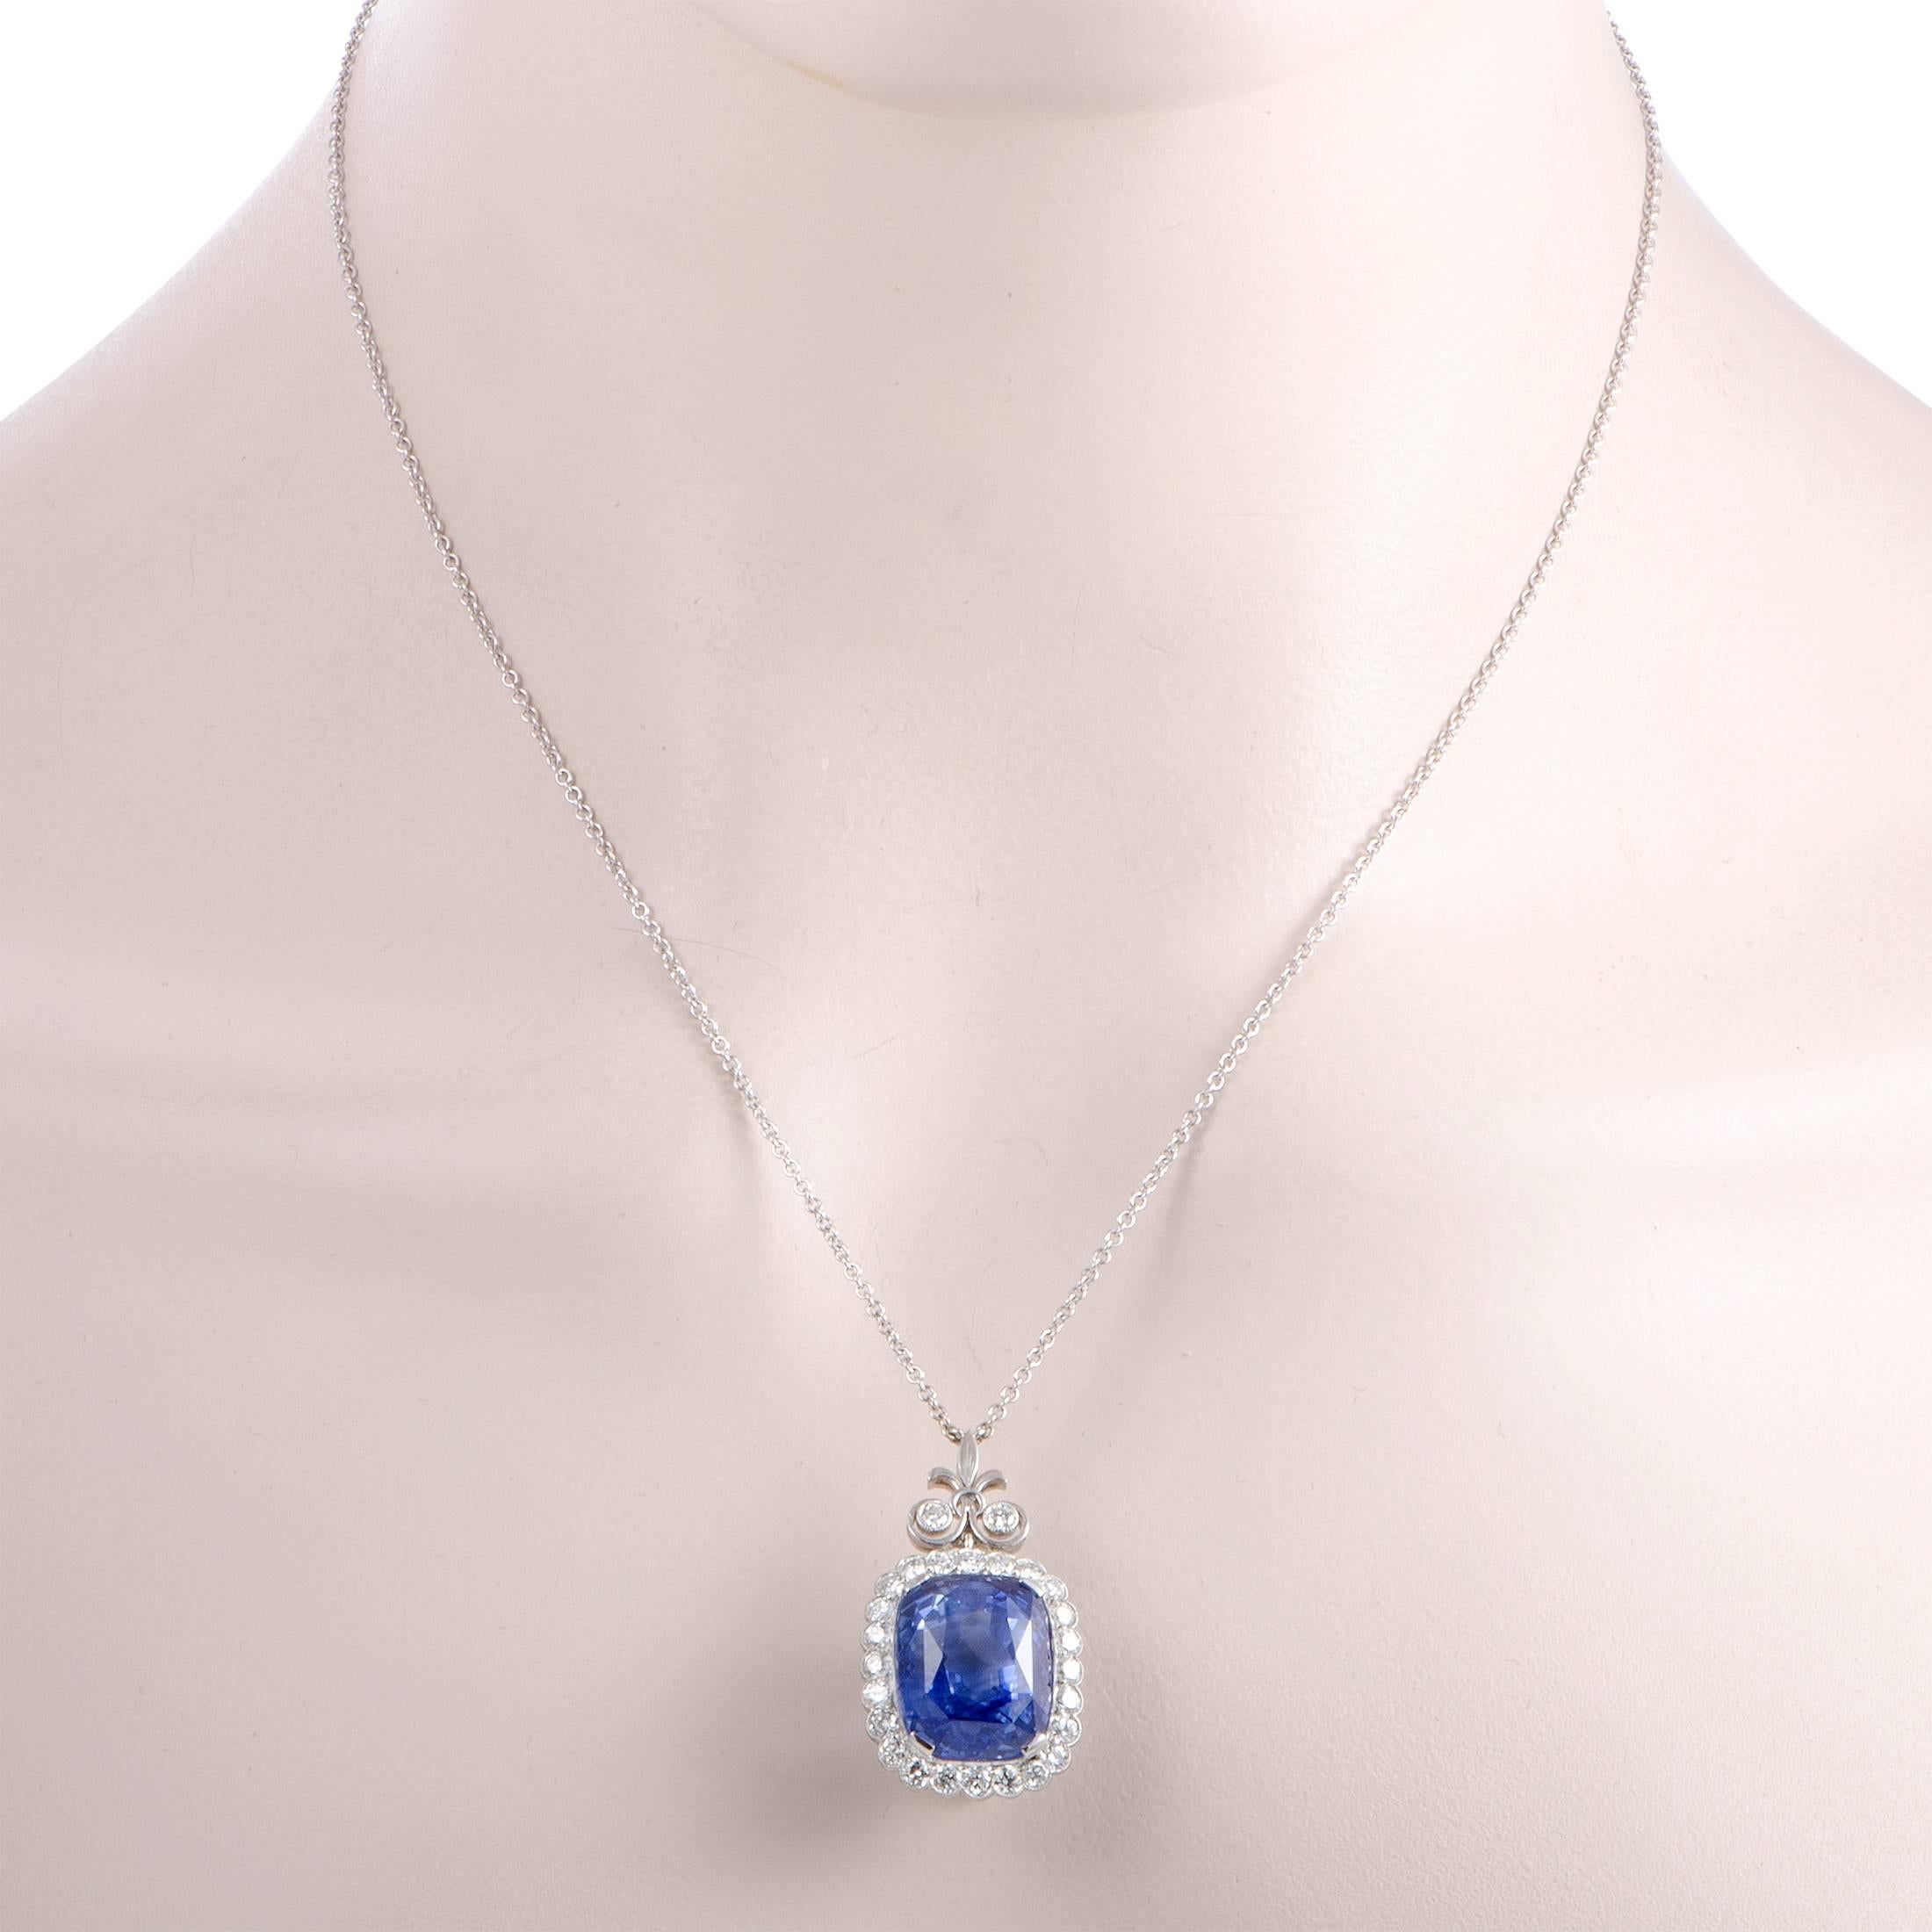 Featuring an intricately ornamented pendant set with a captivating sapphire and a plethora of resplendent diamond stones, this splendid necklace boasts an incredibly regal appeal. Made of elegant 18K white gold, the necklace is decorated with a